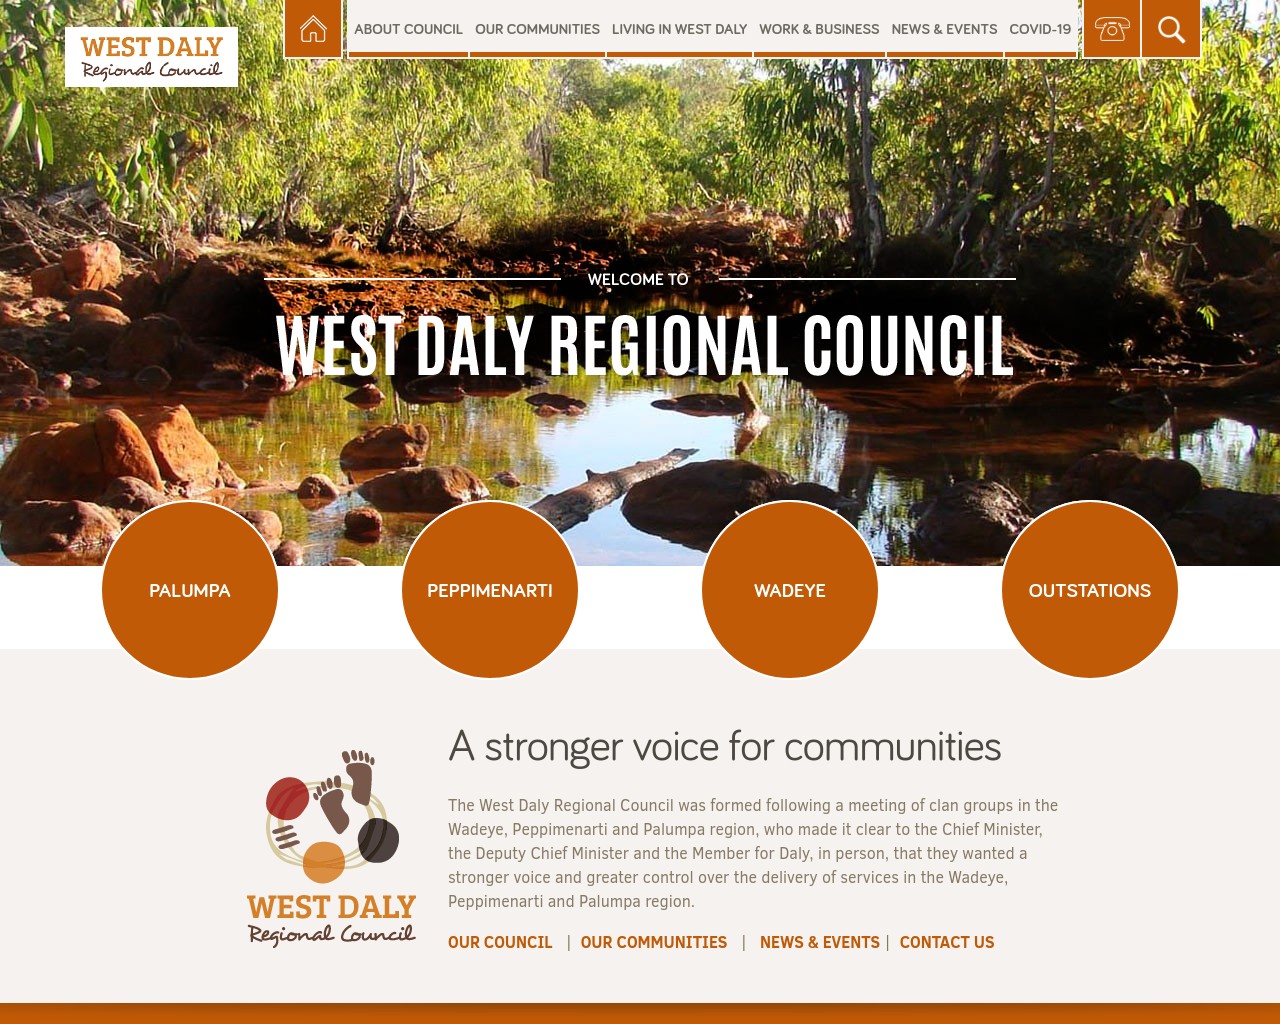 West Daly Regional Council